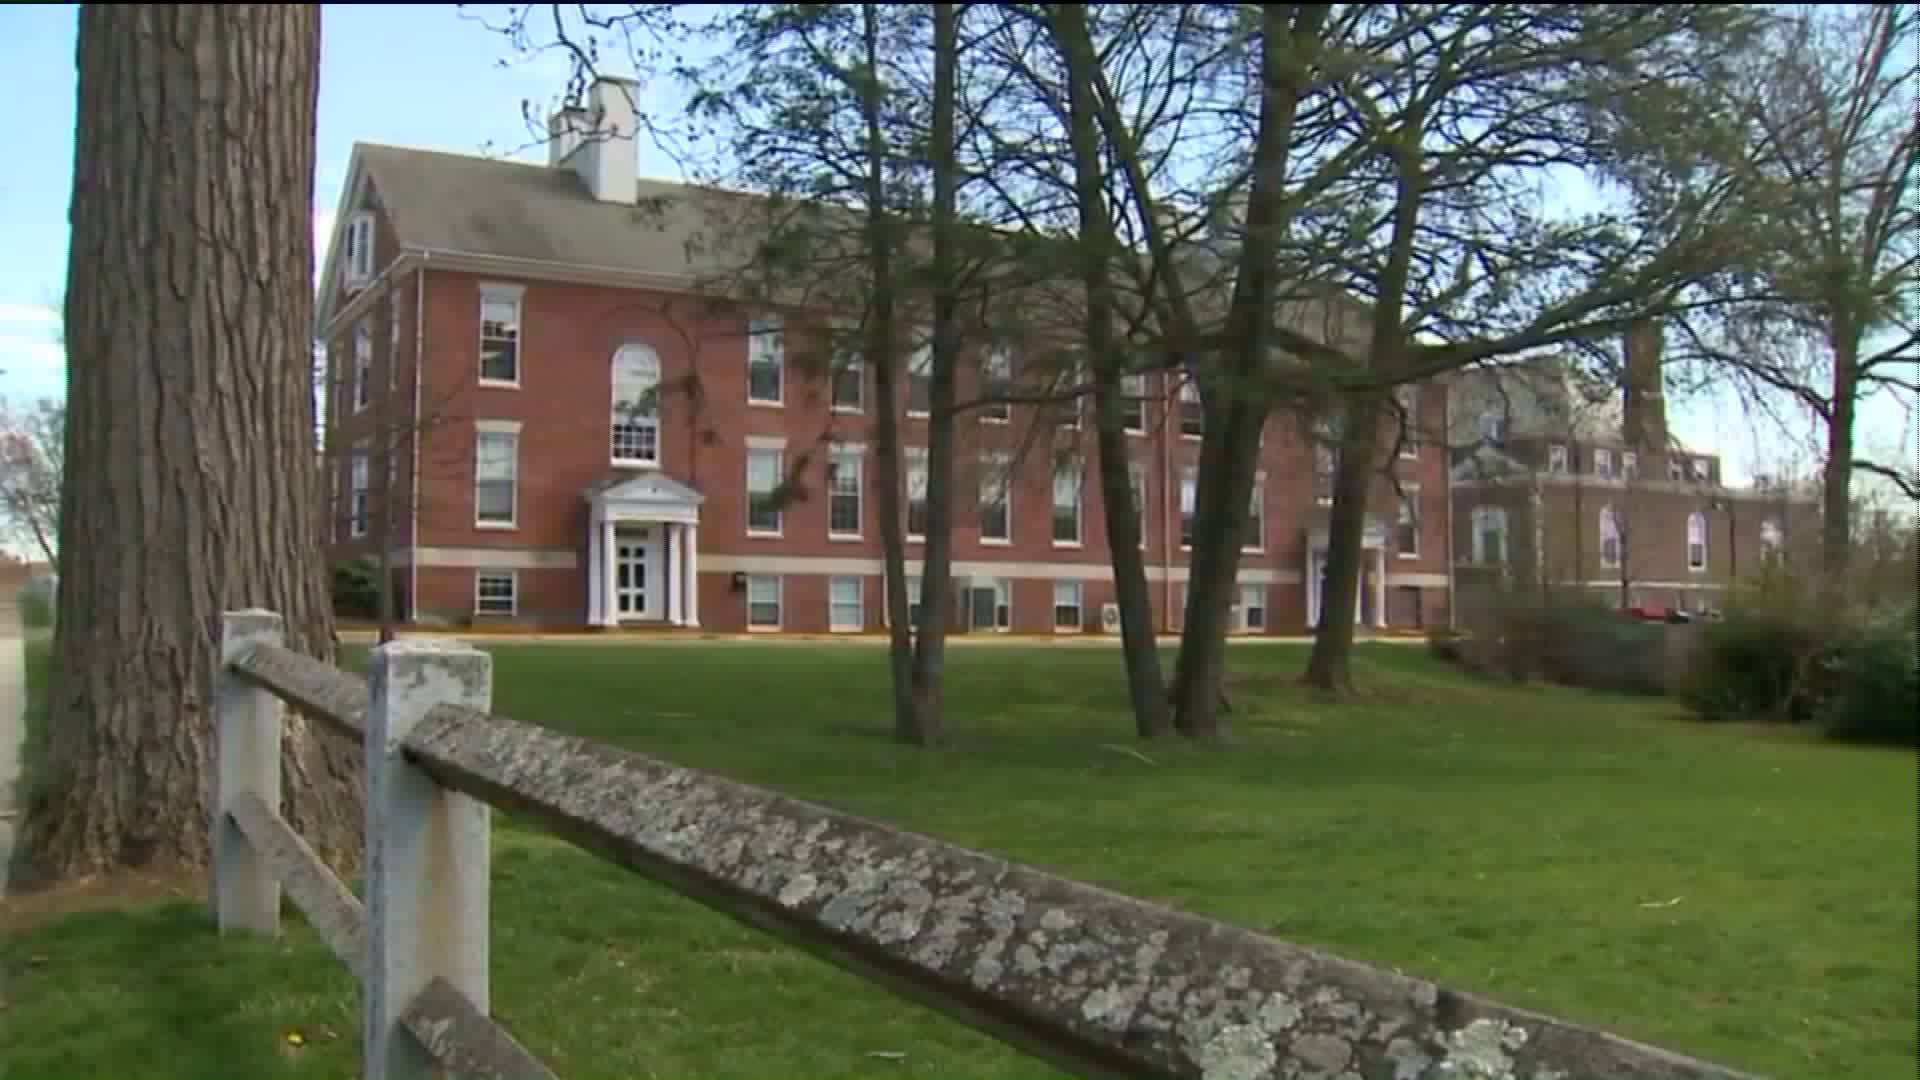 Choate Rosemary Hall admits to sexual abuse of students